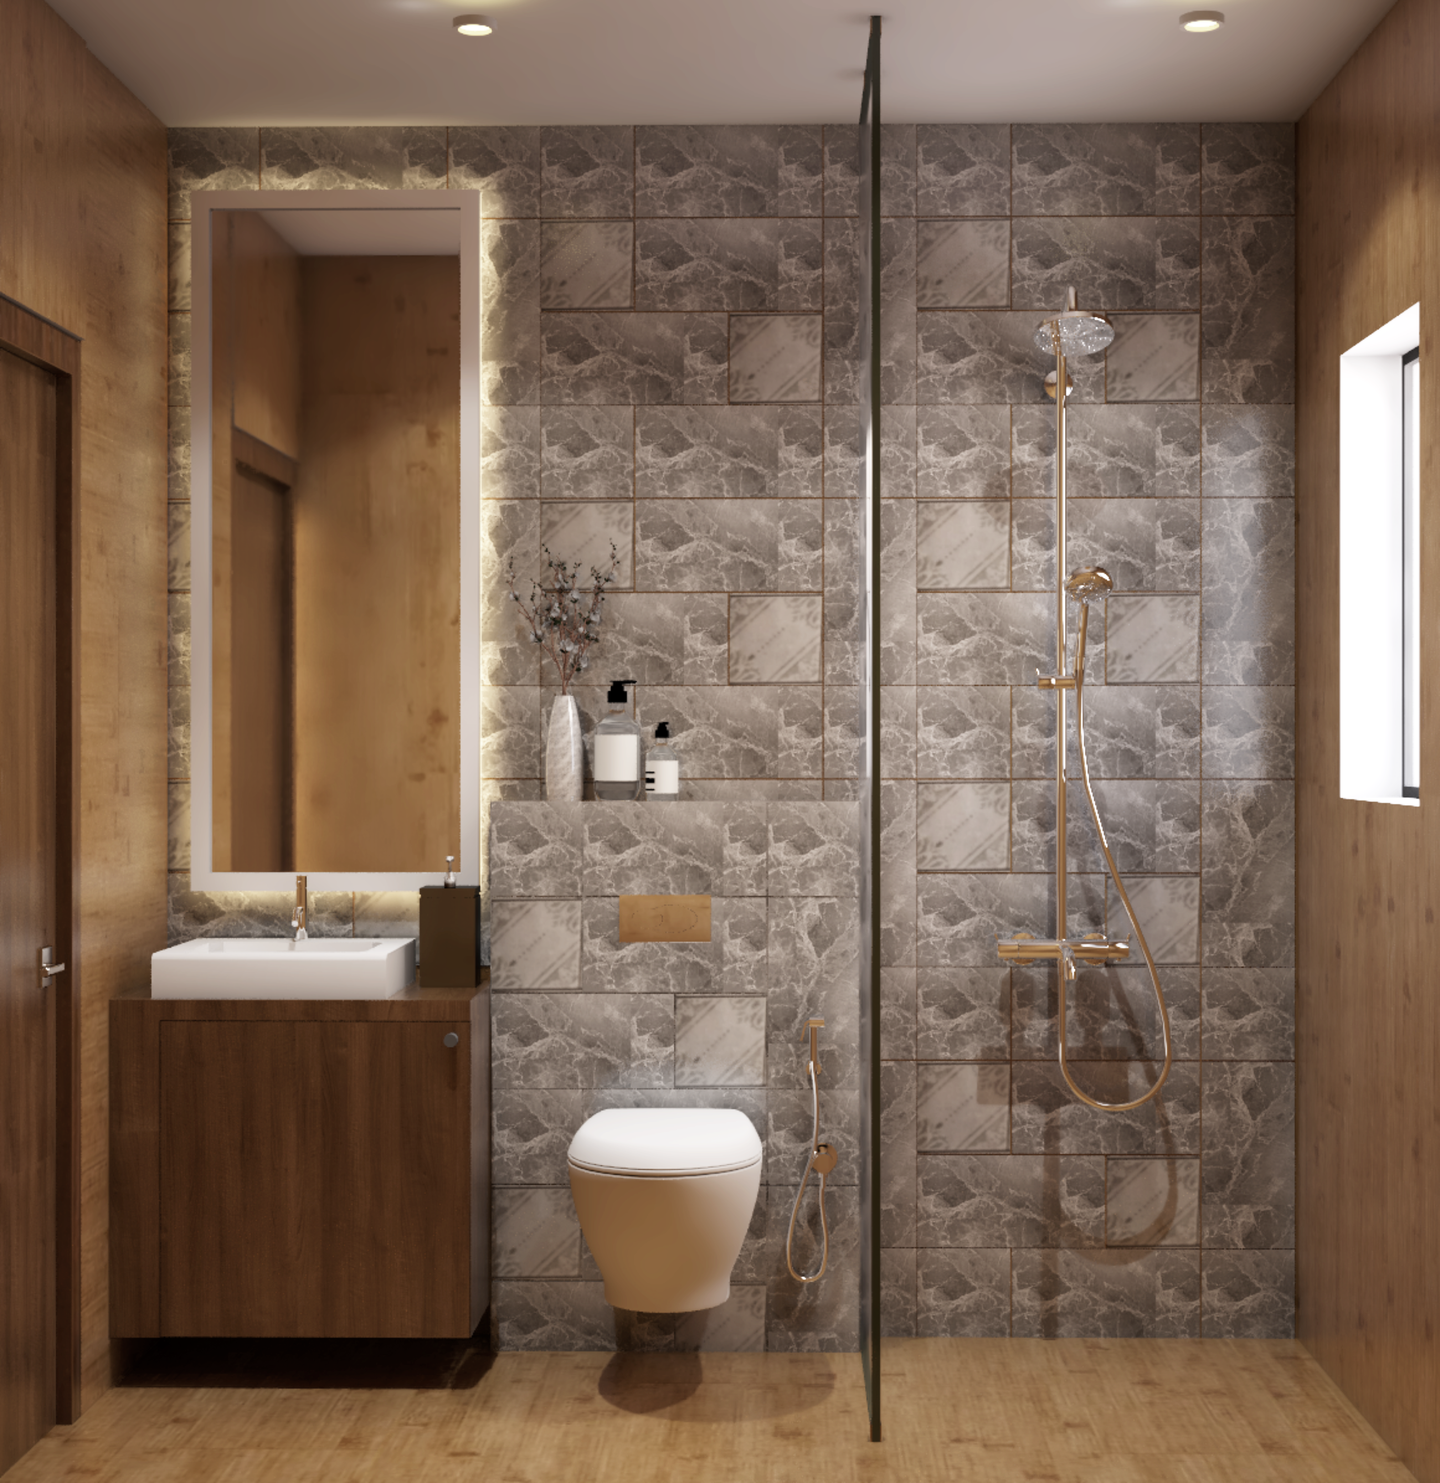 Compact Bathroom With Classic Interiors & Separate Shower Area - Livspace